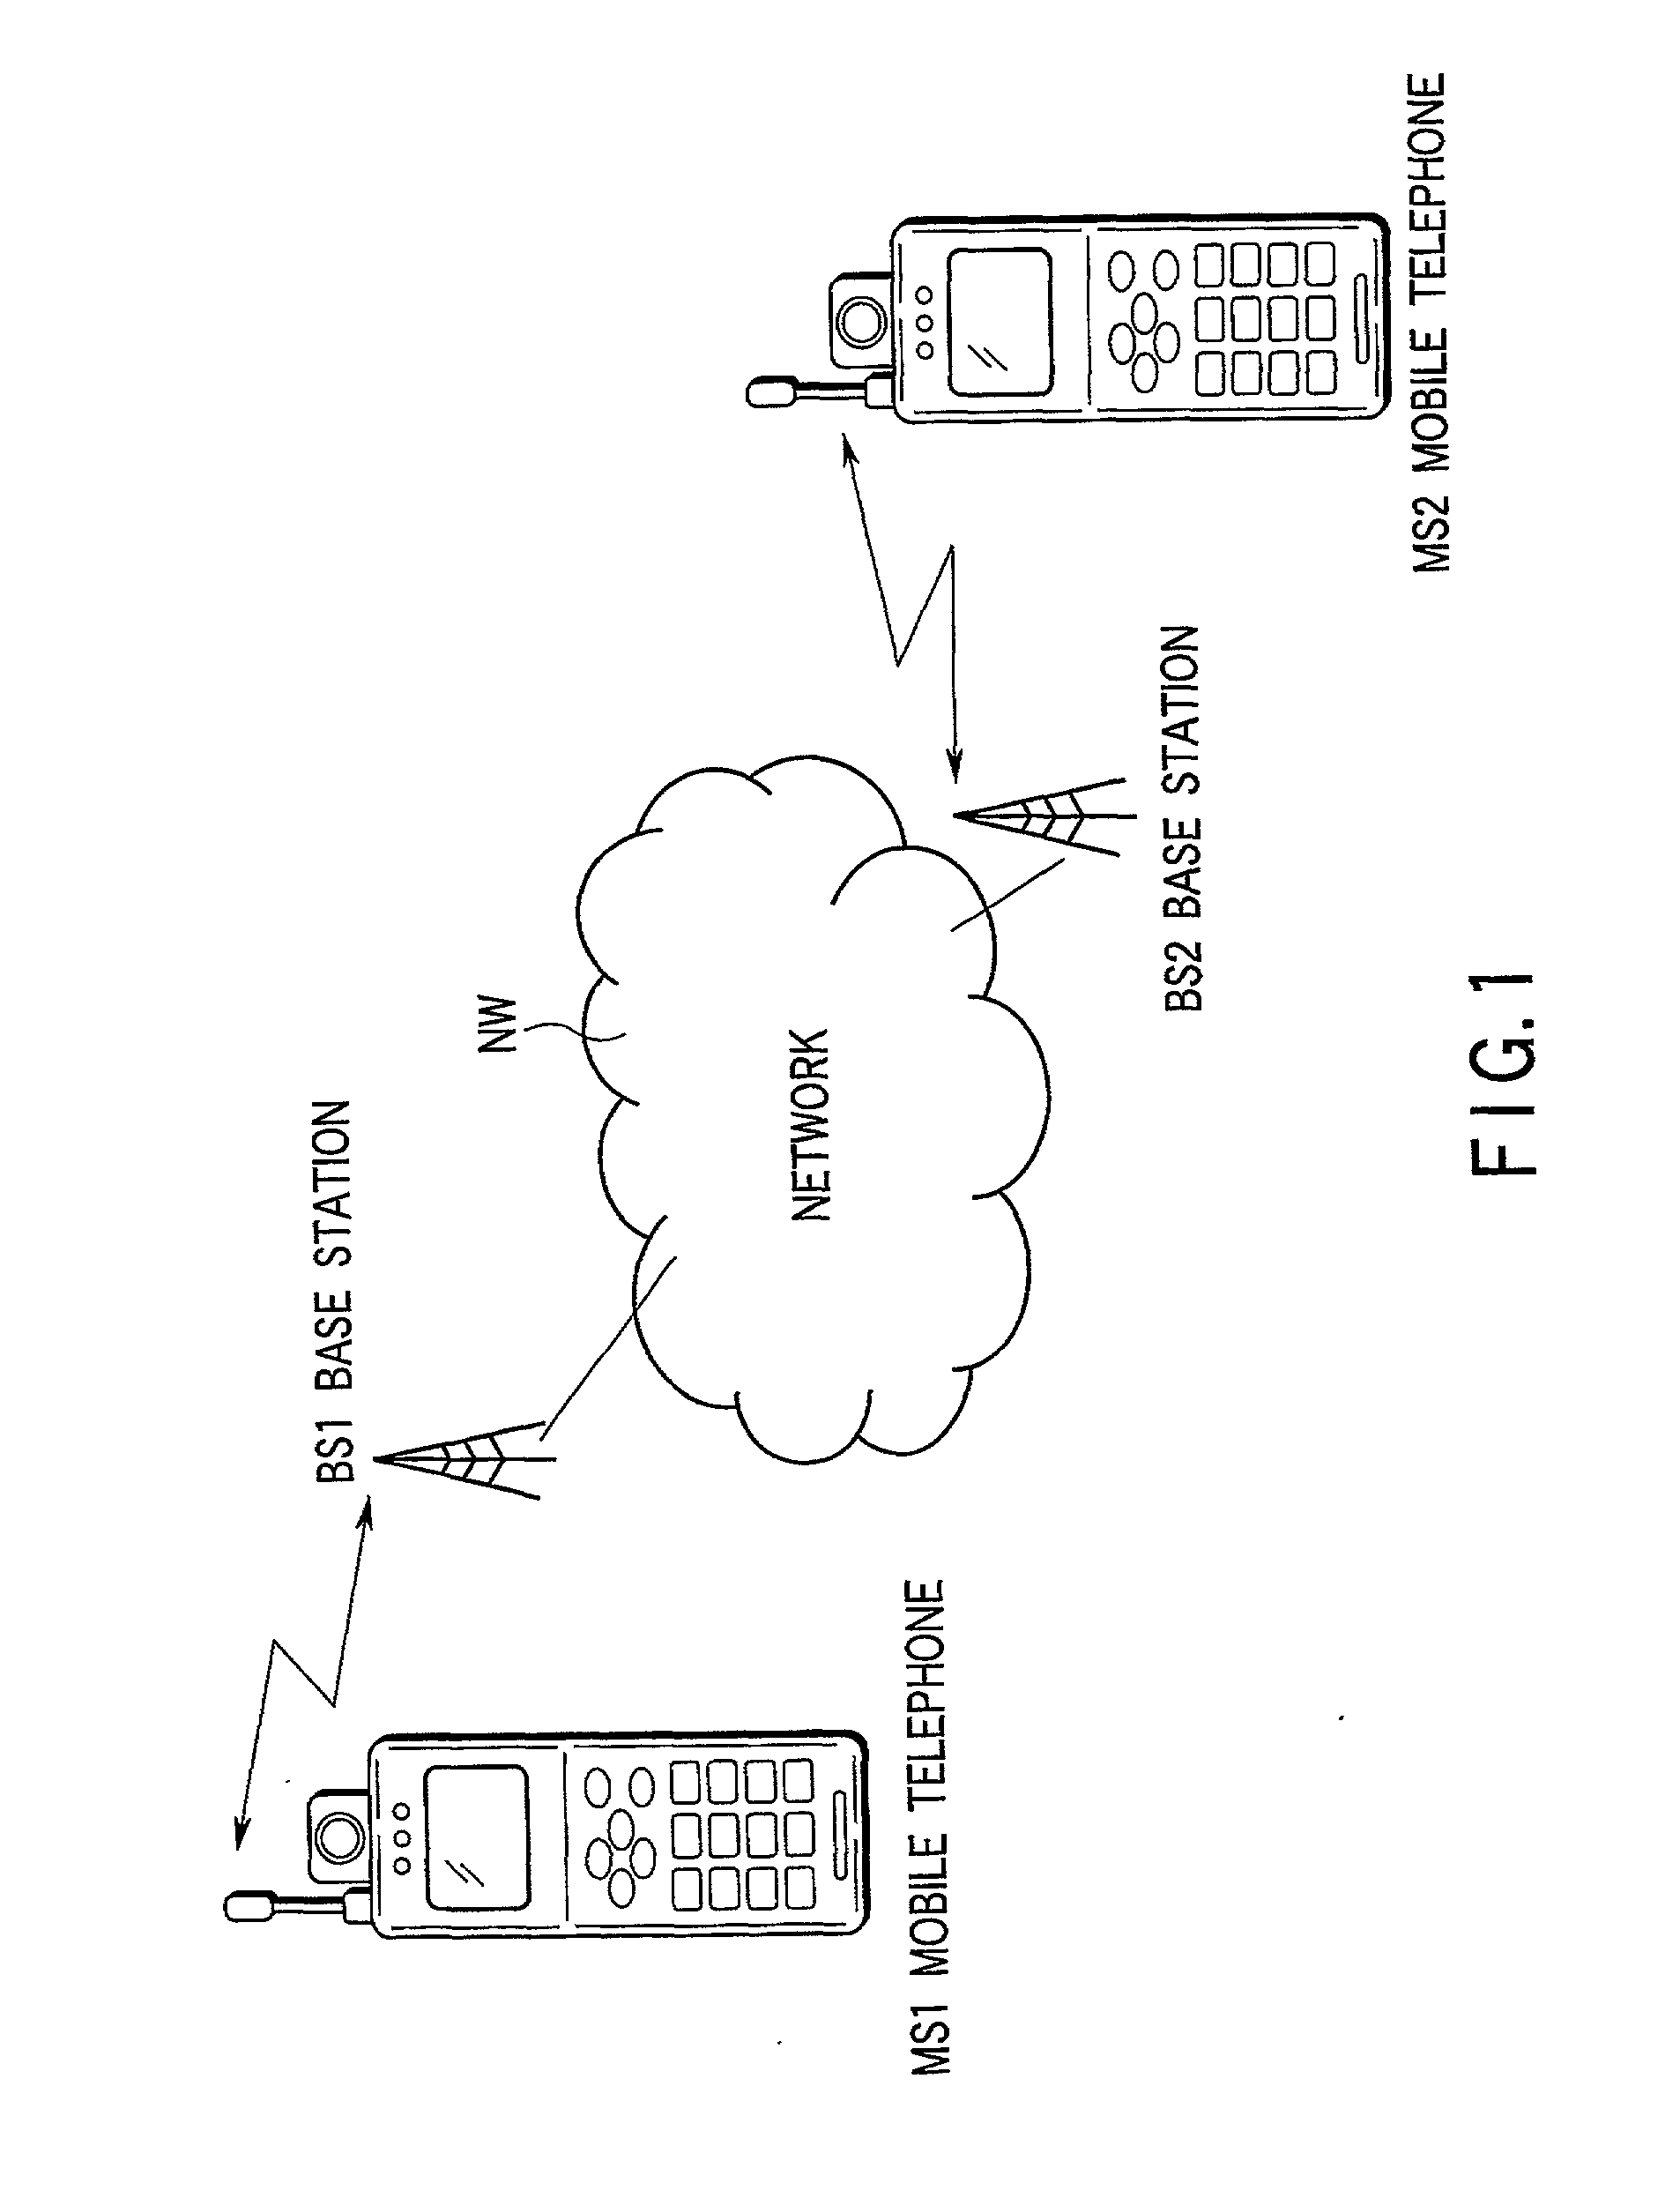 Data transmission system and communication devices